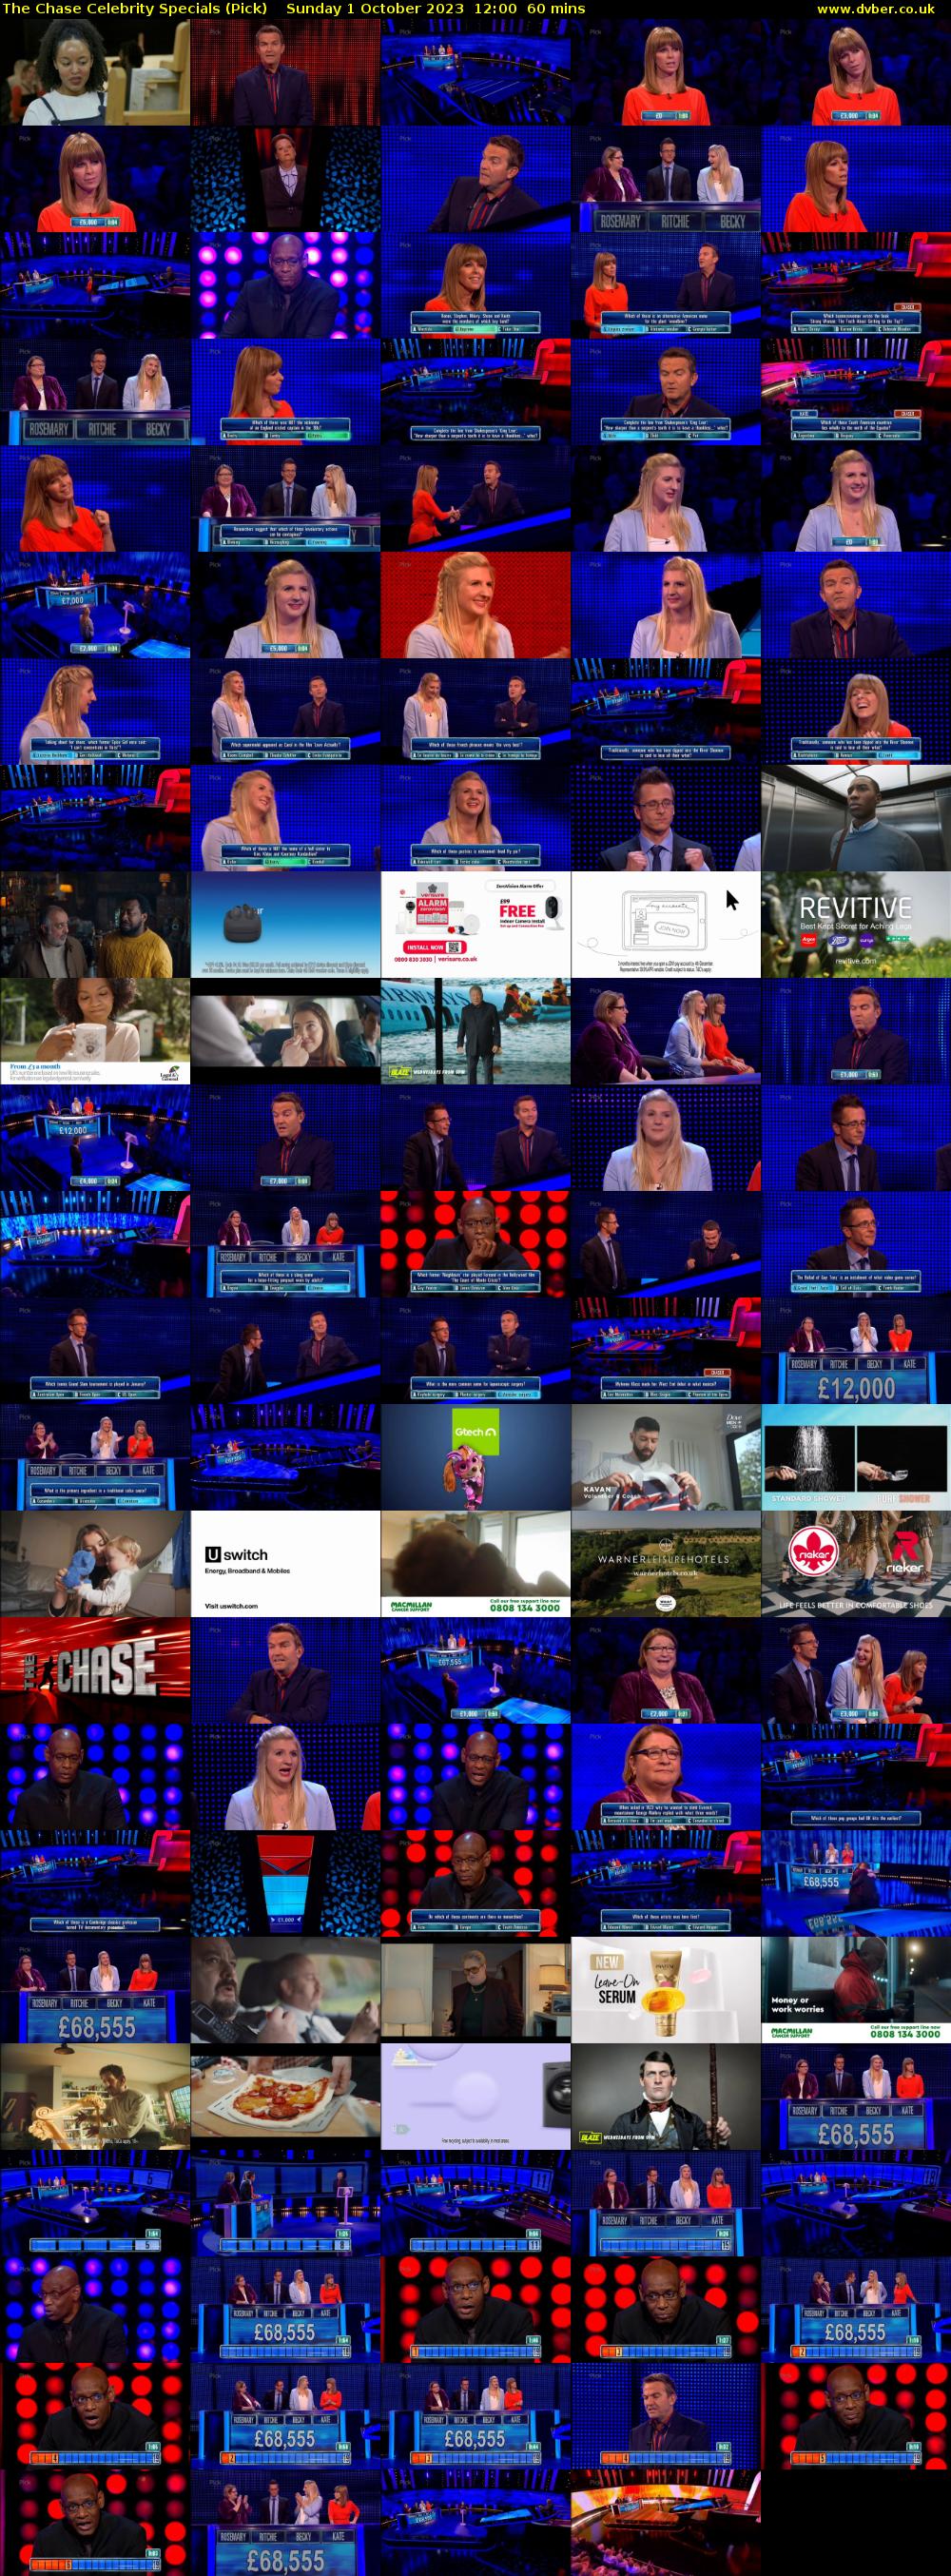 The Chase Celebrity Specials (Pick) Sunday 1 October 2023 12:00 - 13:00